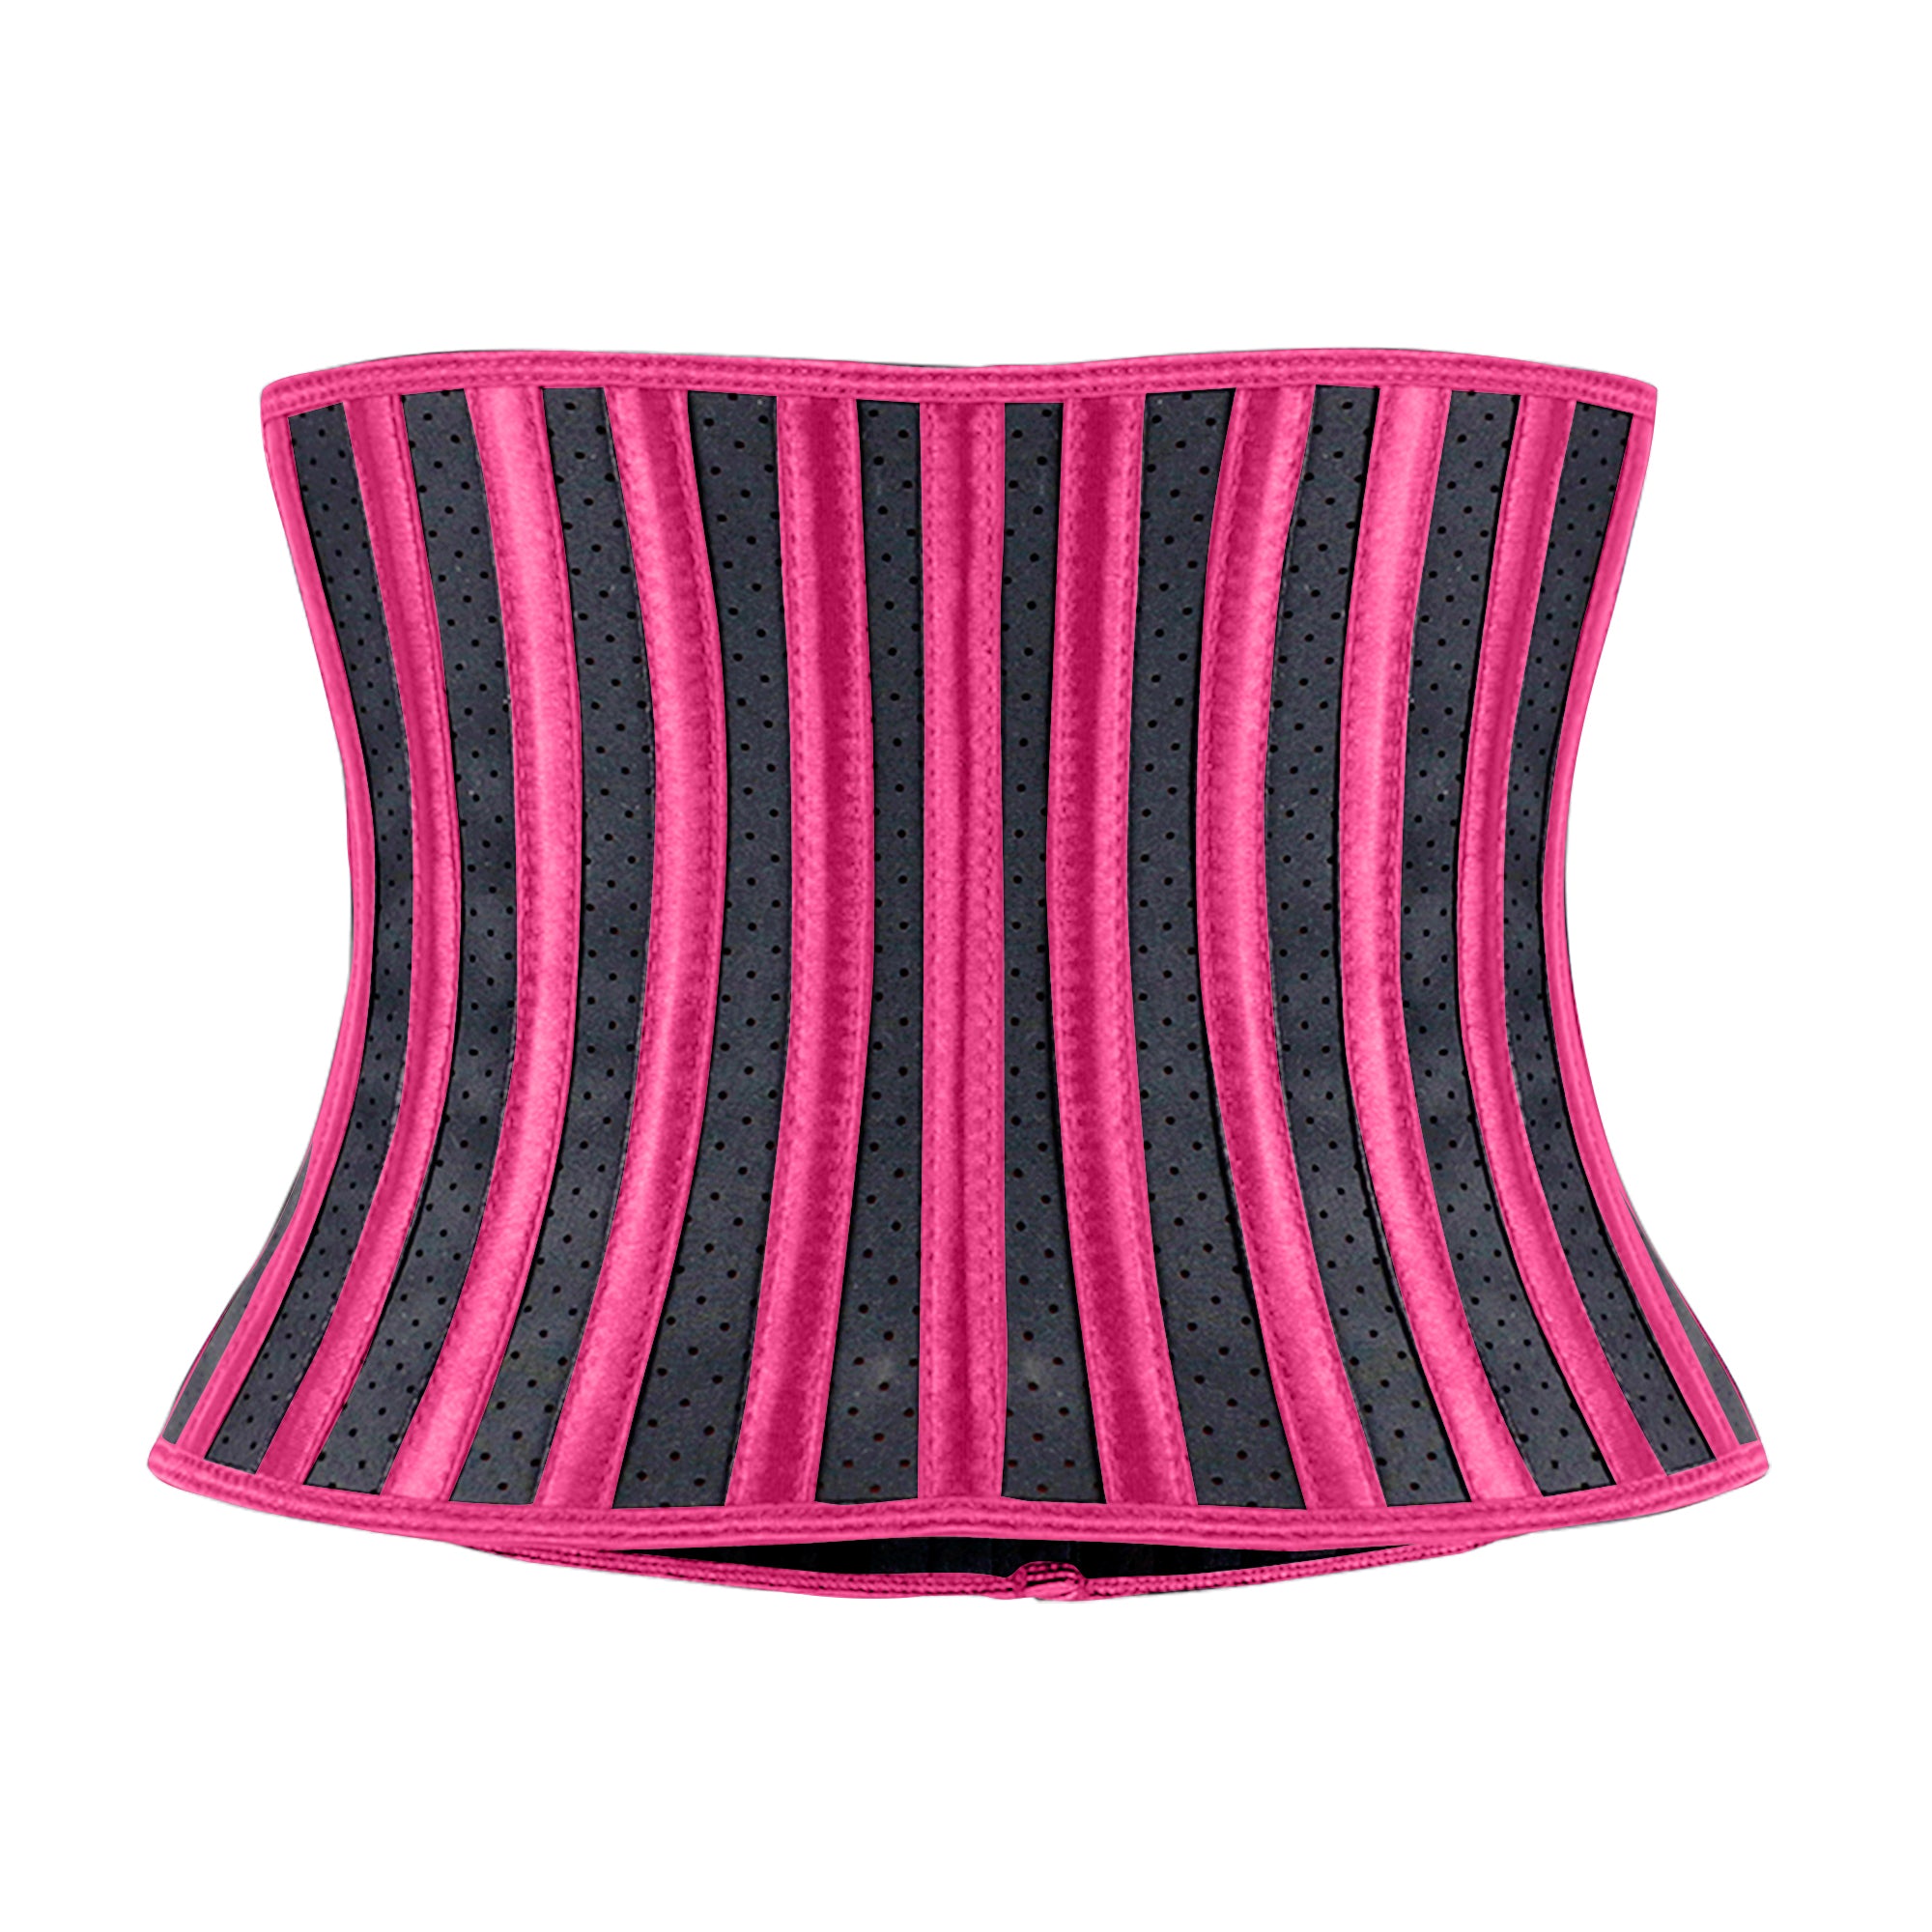 Maskateer - Collection LITE A waist trainer that feels like